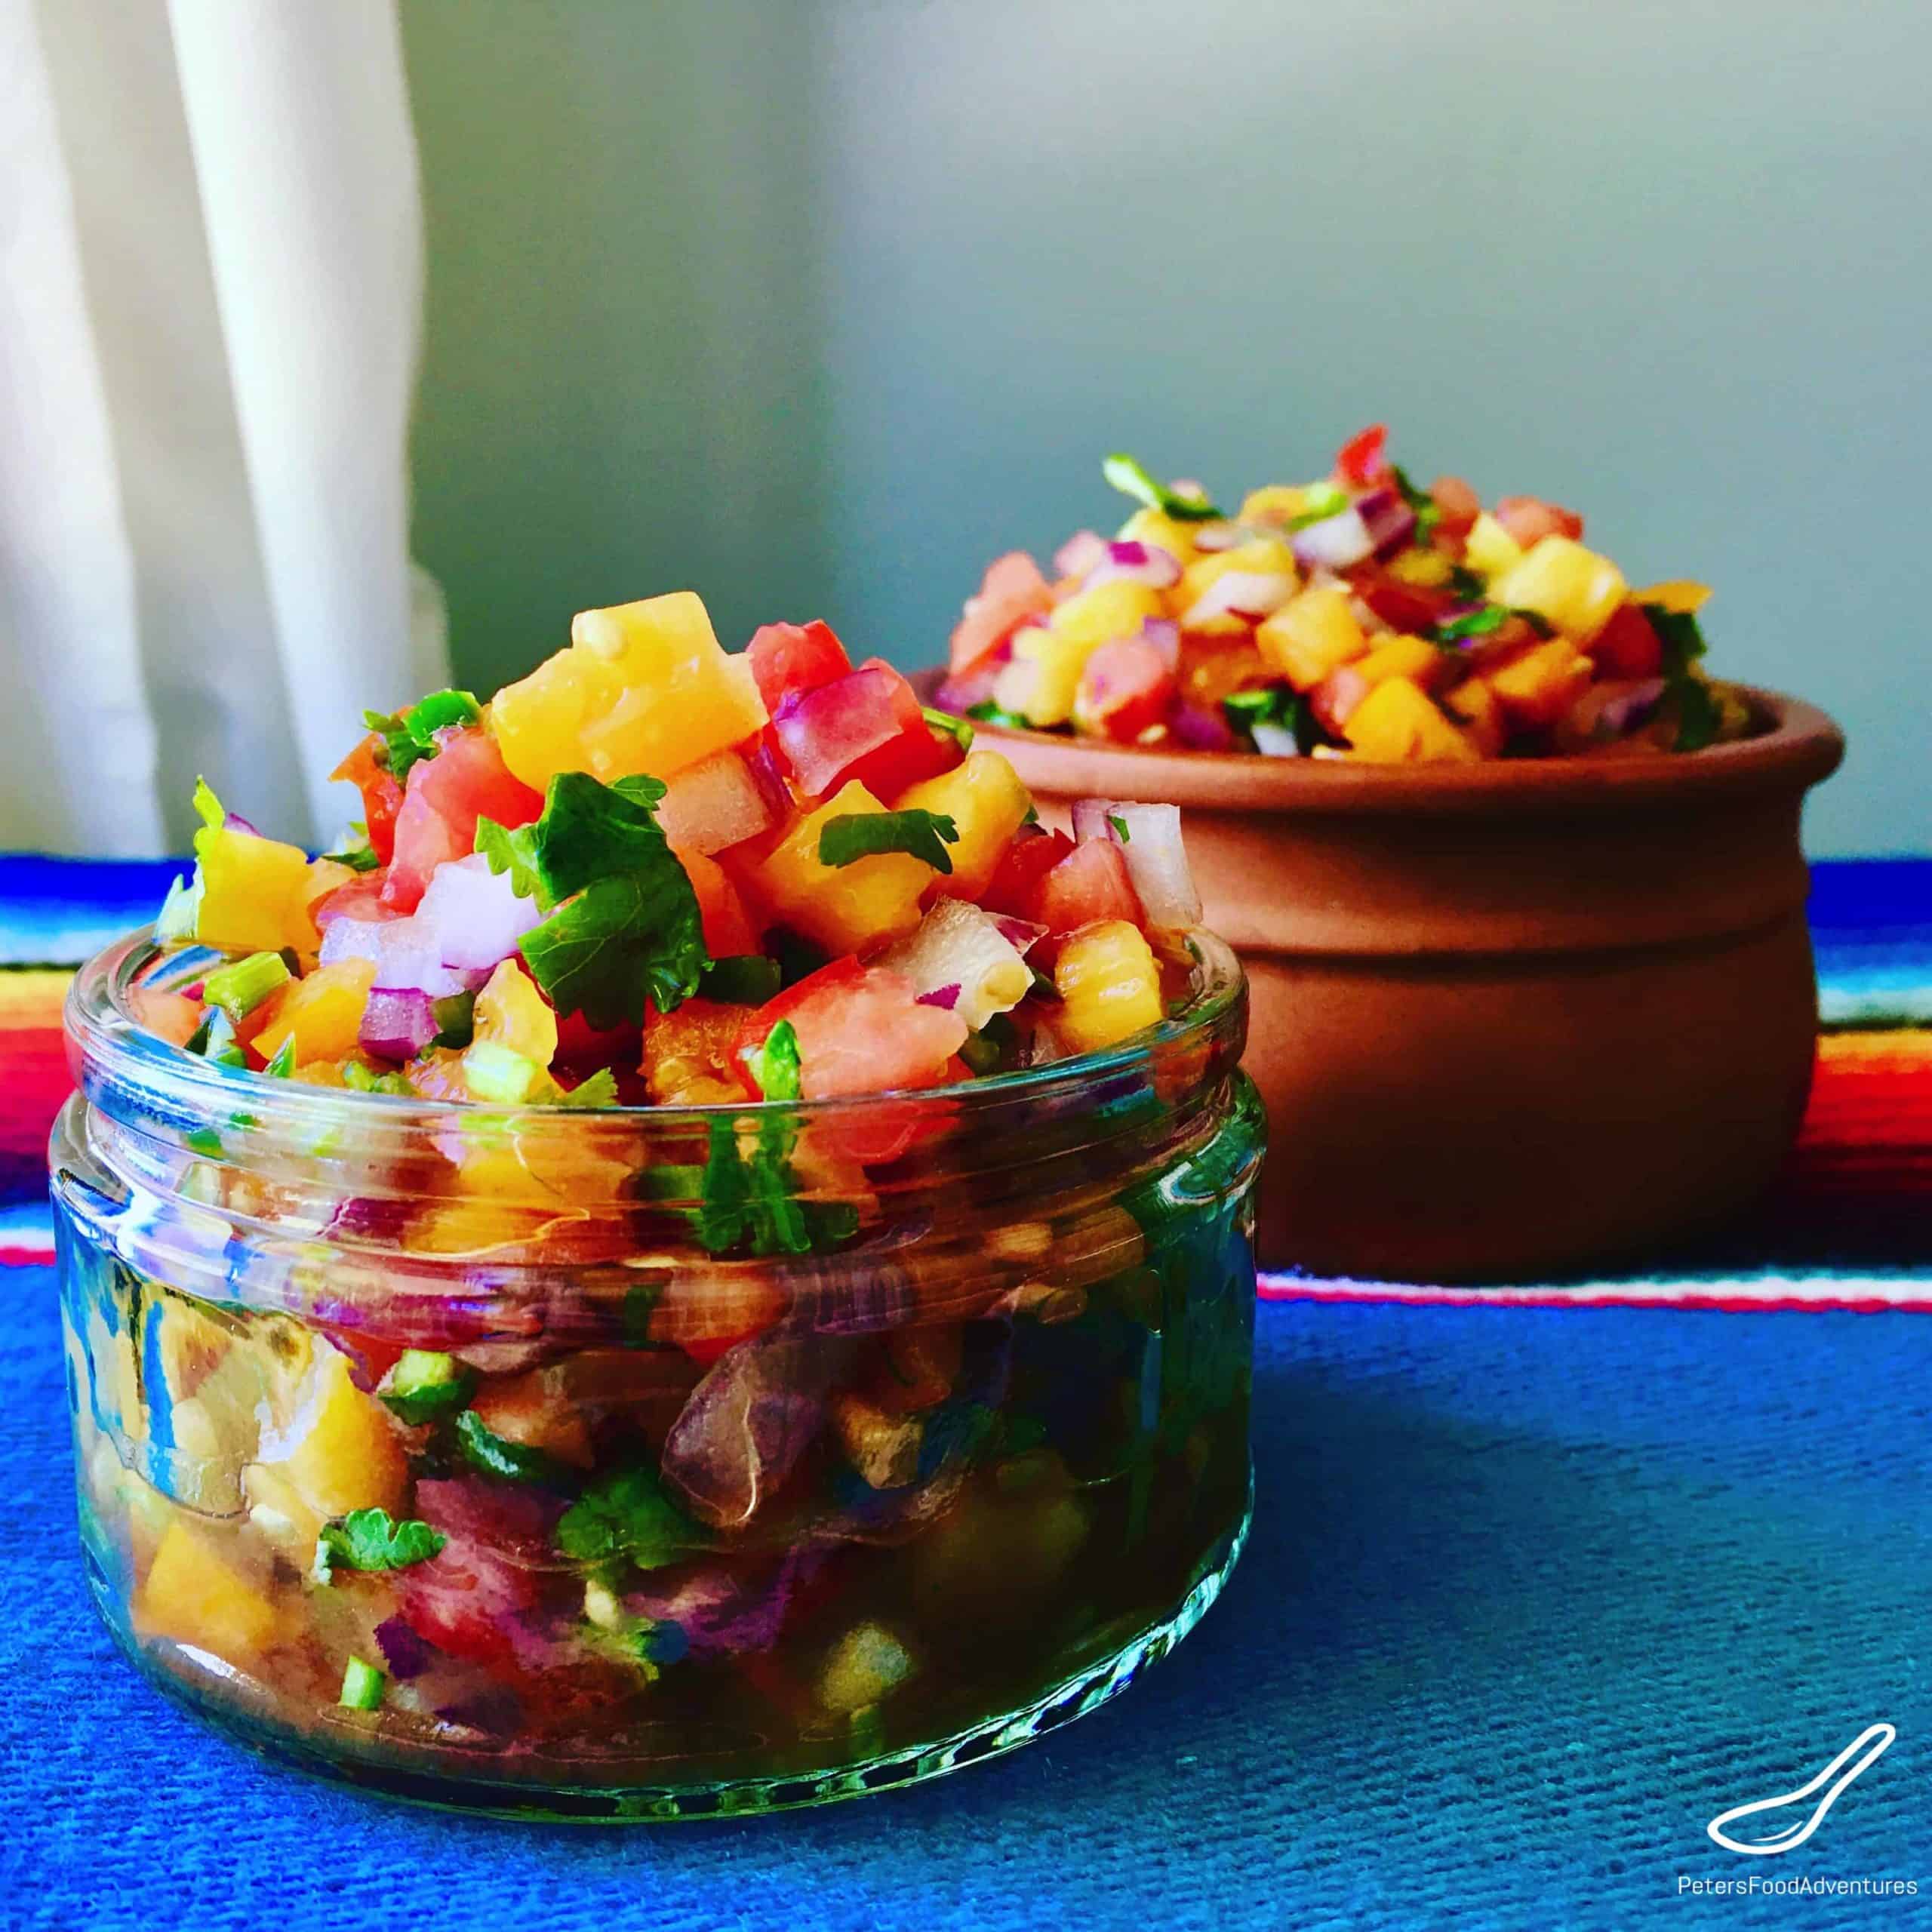 Easy made fresh salsa with chopped heirloom tomatoes, onions, jalapeños, cilantro and lime. Colorfully delicious! Perfect to dip nachos, tacos, fajitas or simply tortilla chips - Salsa Fresca - Pico de Gallo